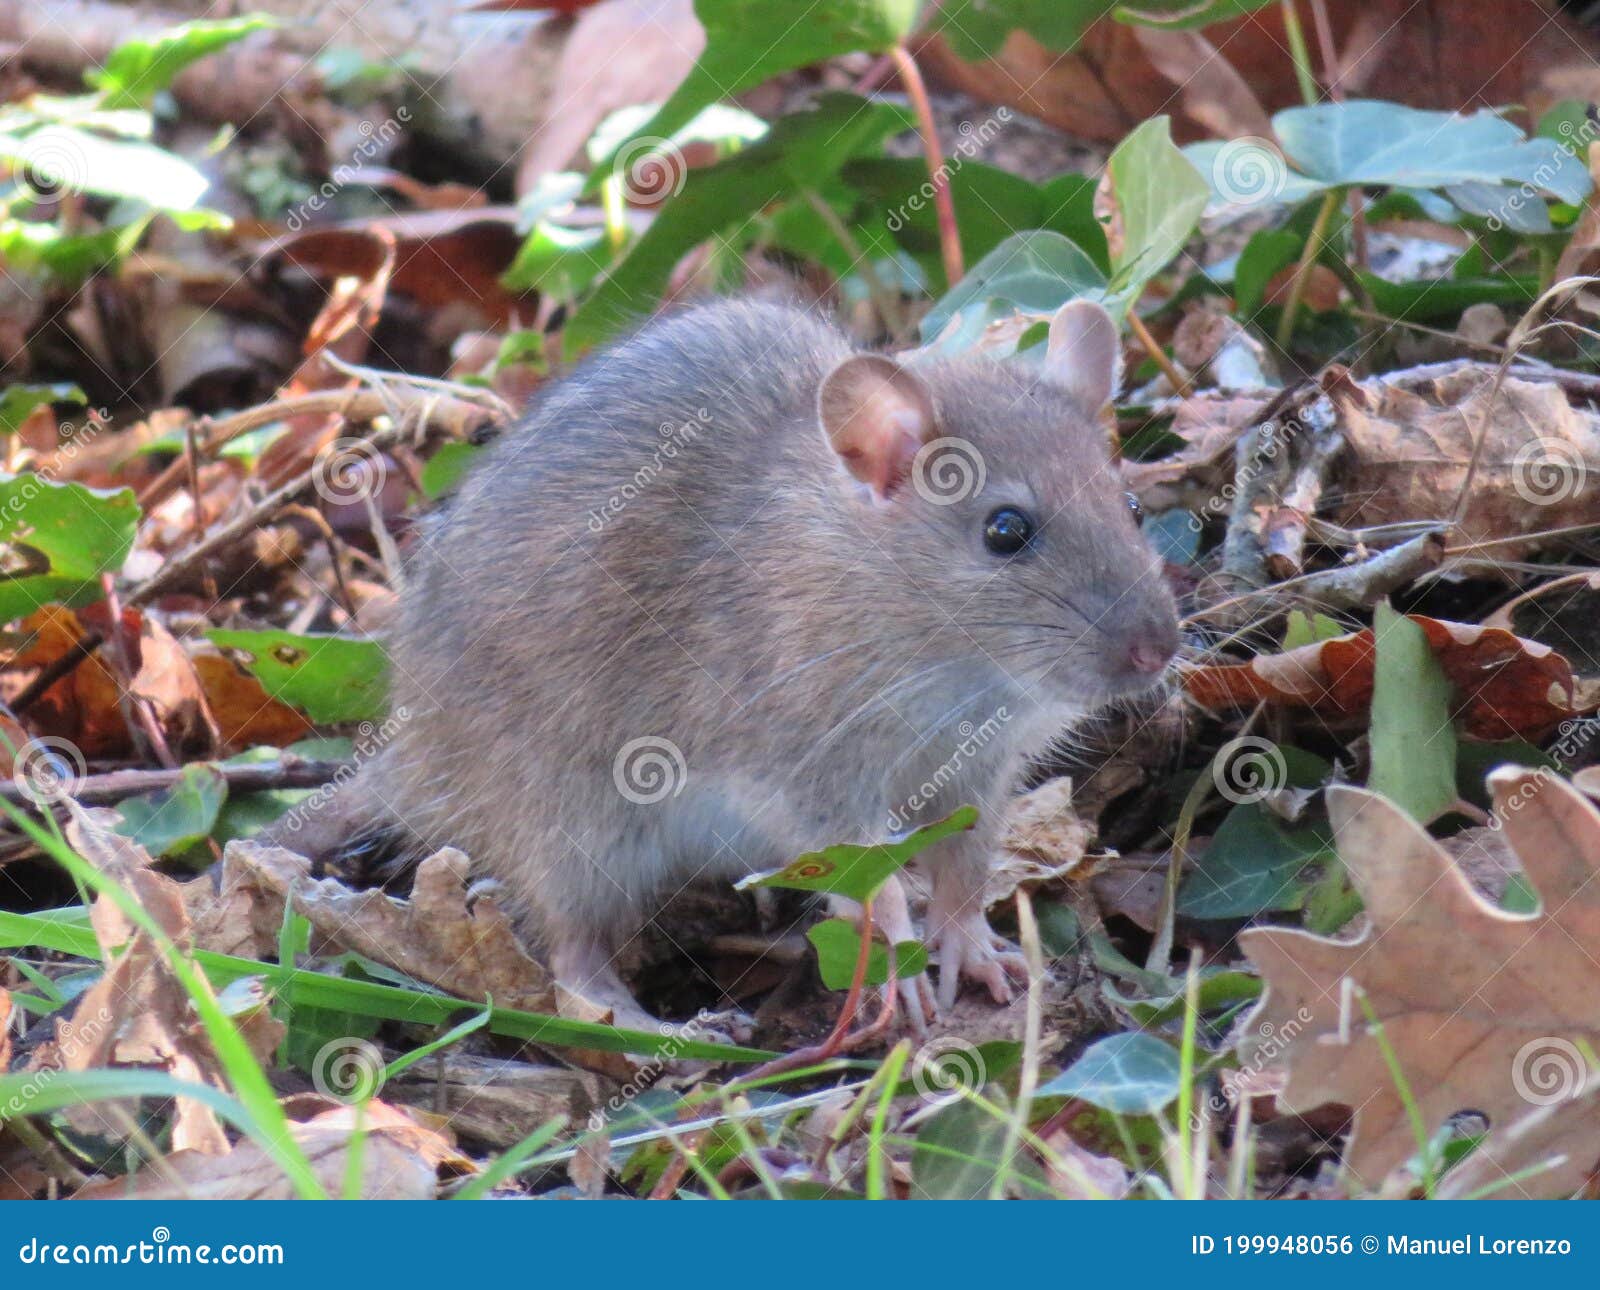 beautiful mouse in the countryside looking for food